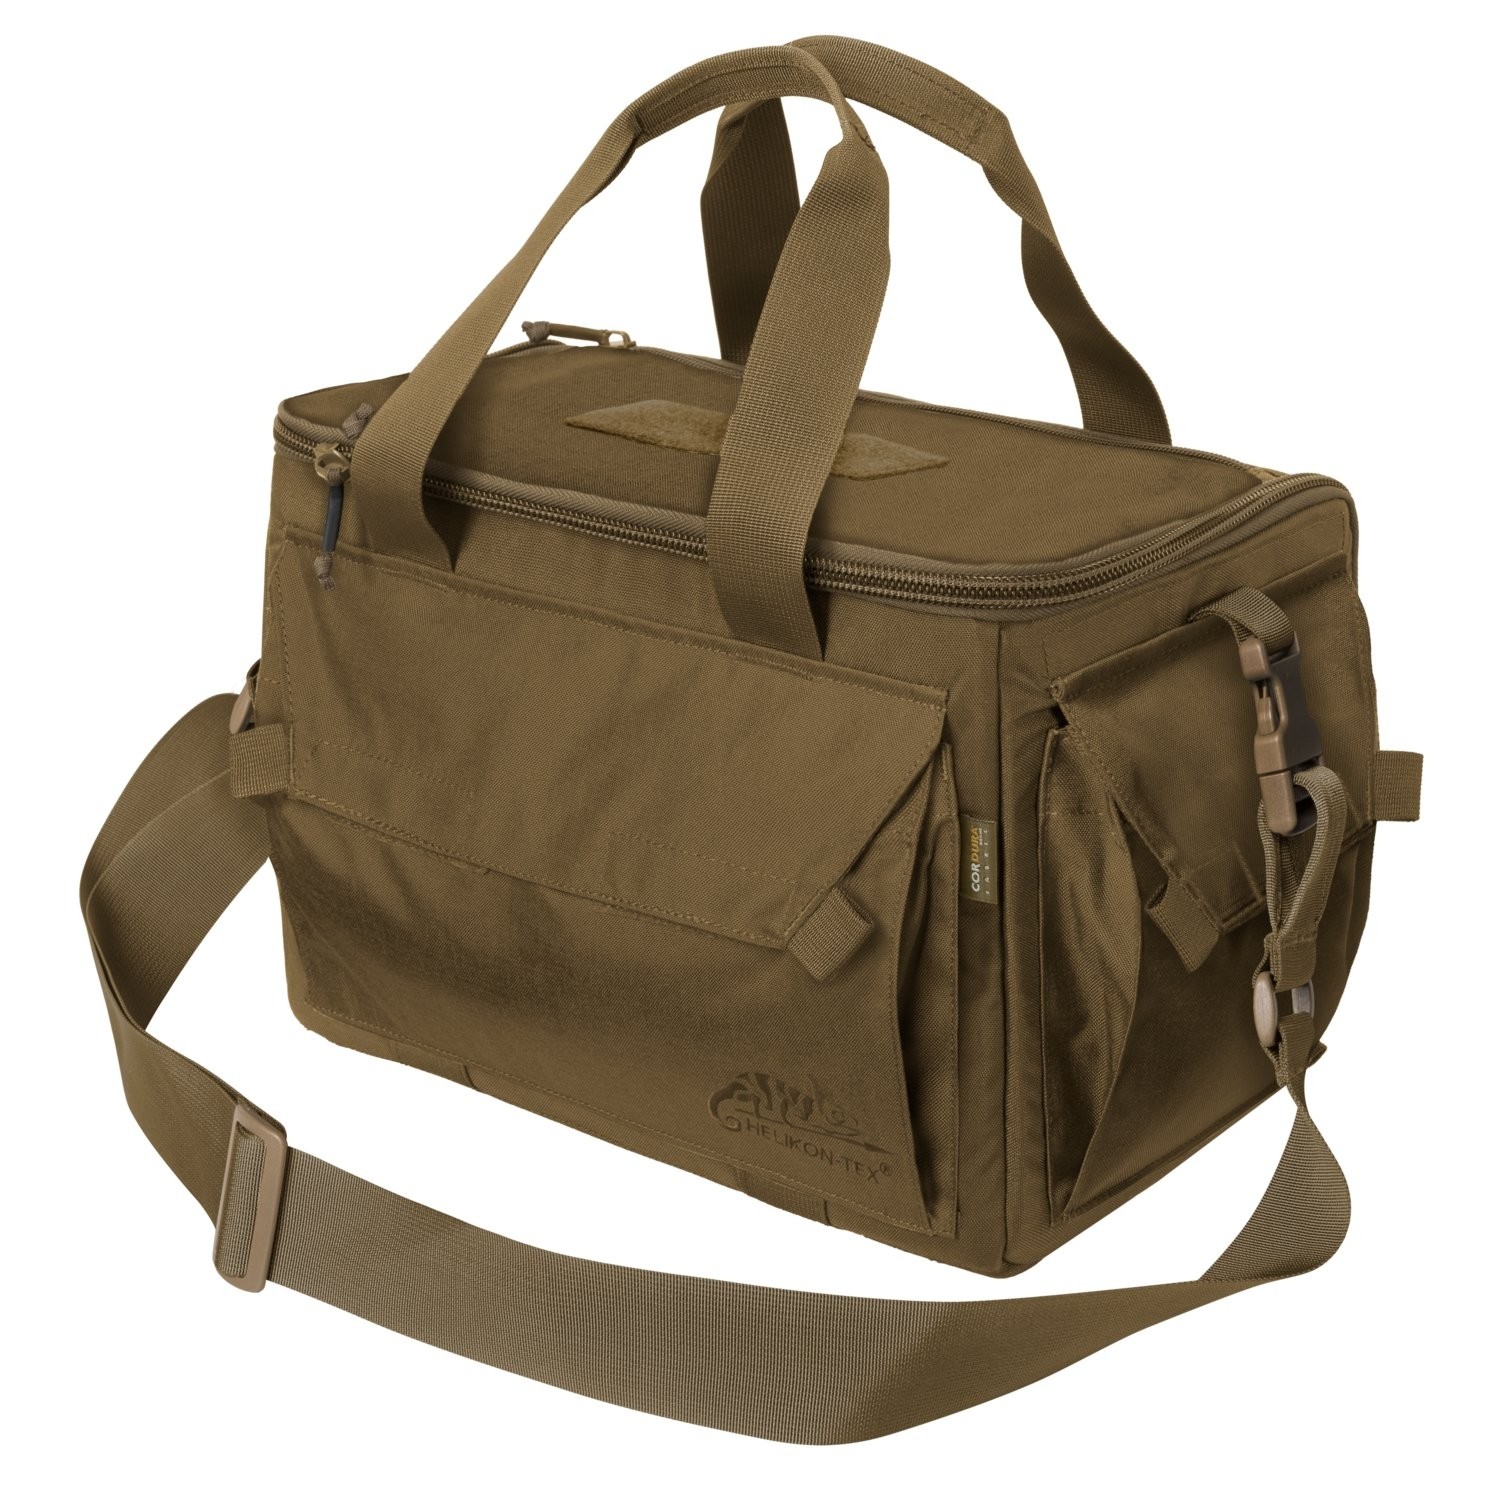 Helikon - Range Bag - Cordura® - MultiCam® - TB-RGB-CD-34 best price, check availability, buy online with